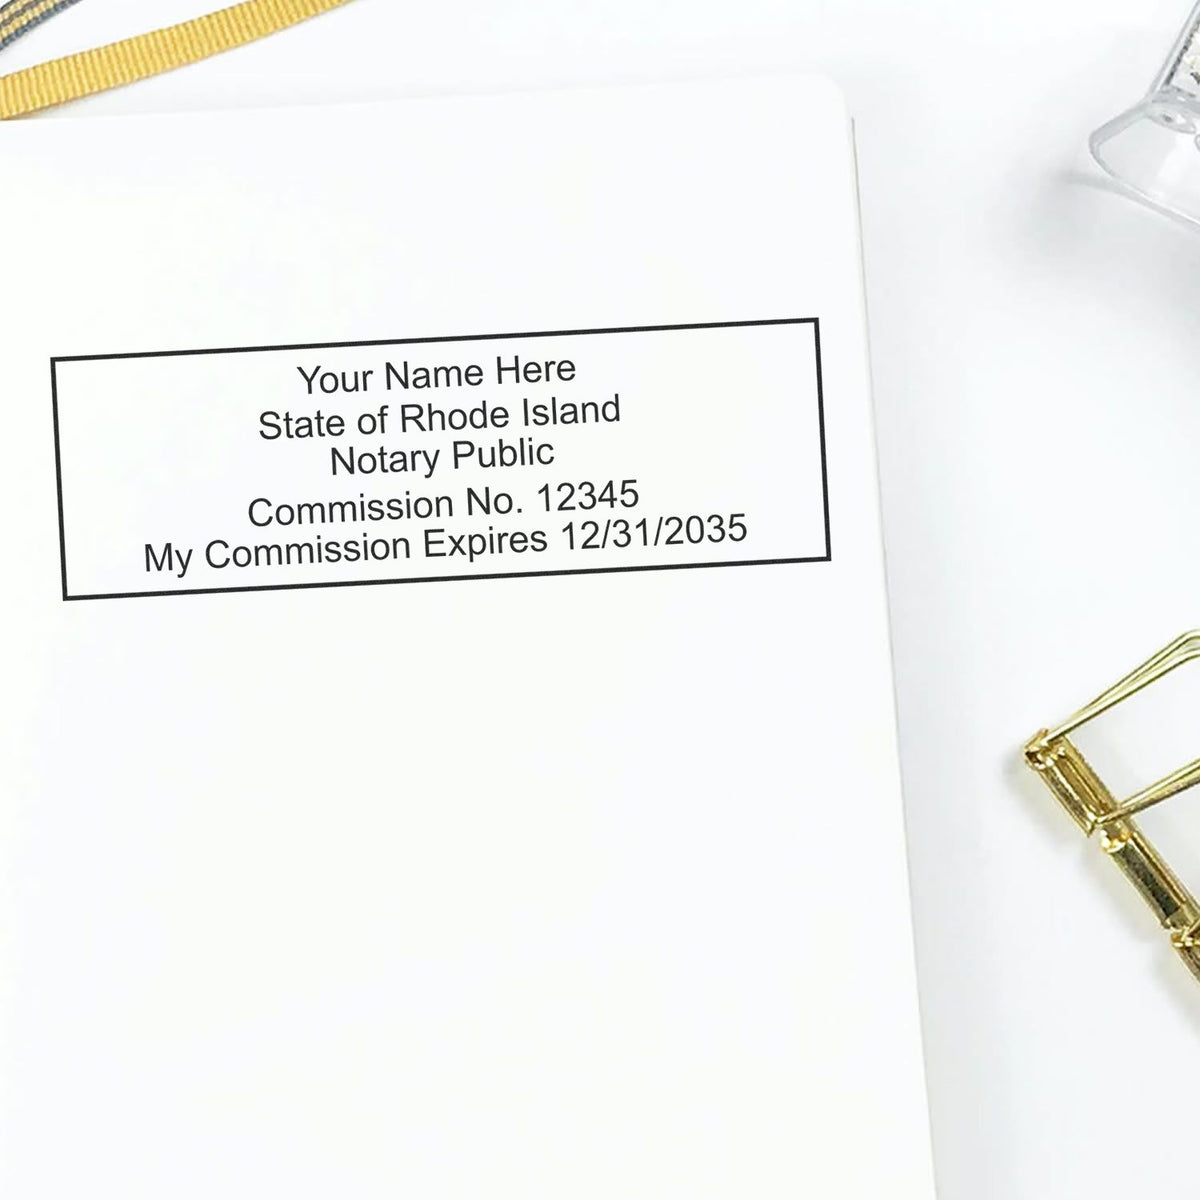 A stamped impression of the Self-Inking Rectangular Rhode Island Notary Stamp in this stylish lifestyle photo, setting the tone for a unique and personalized product.